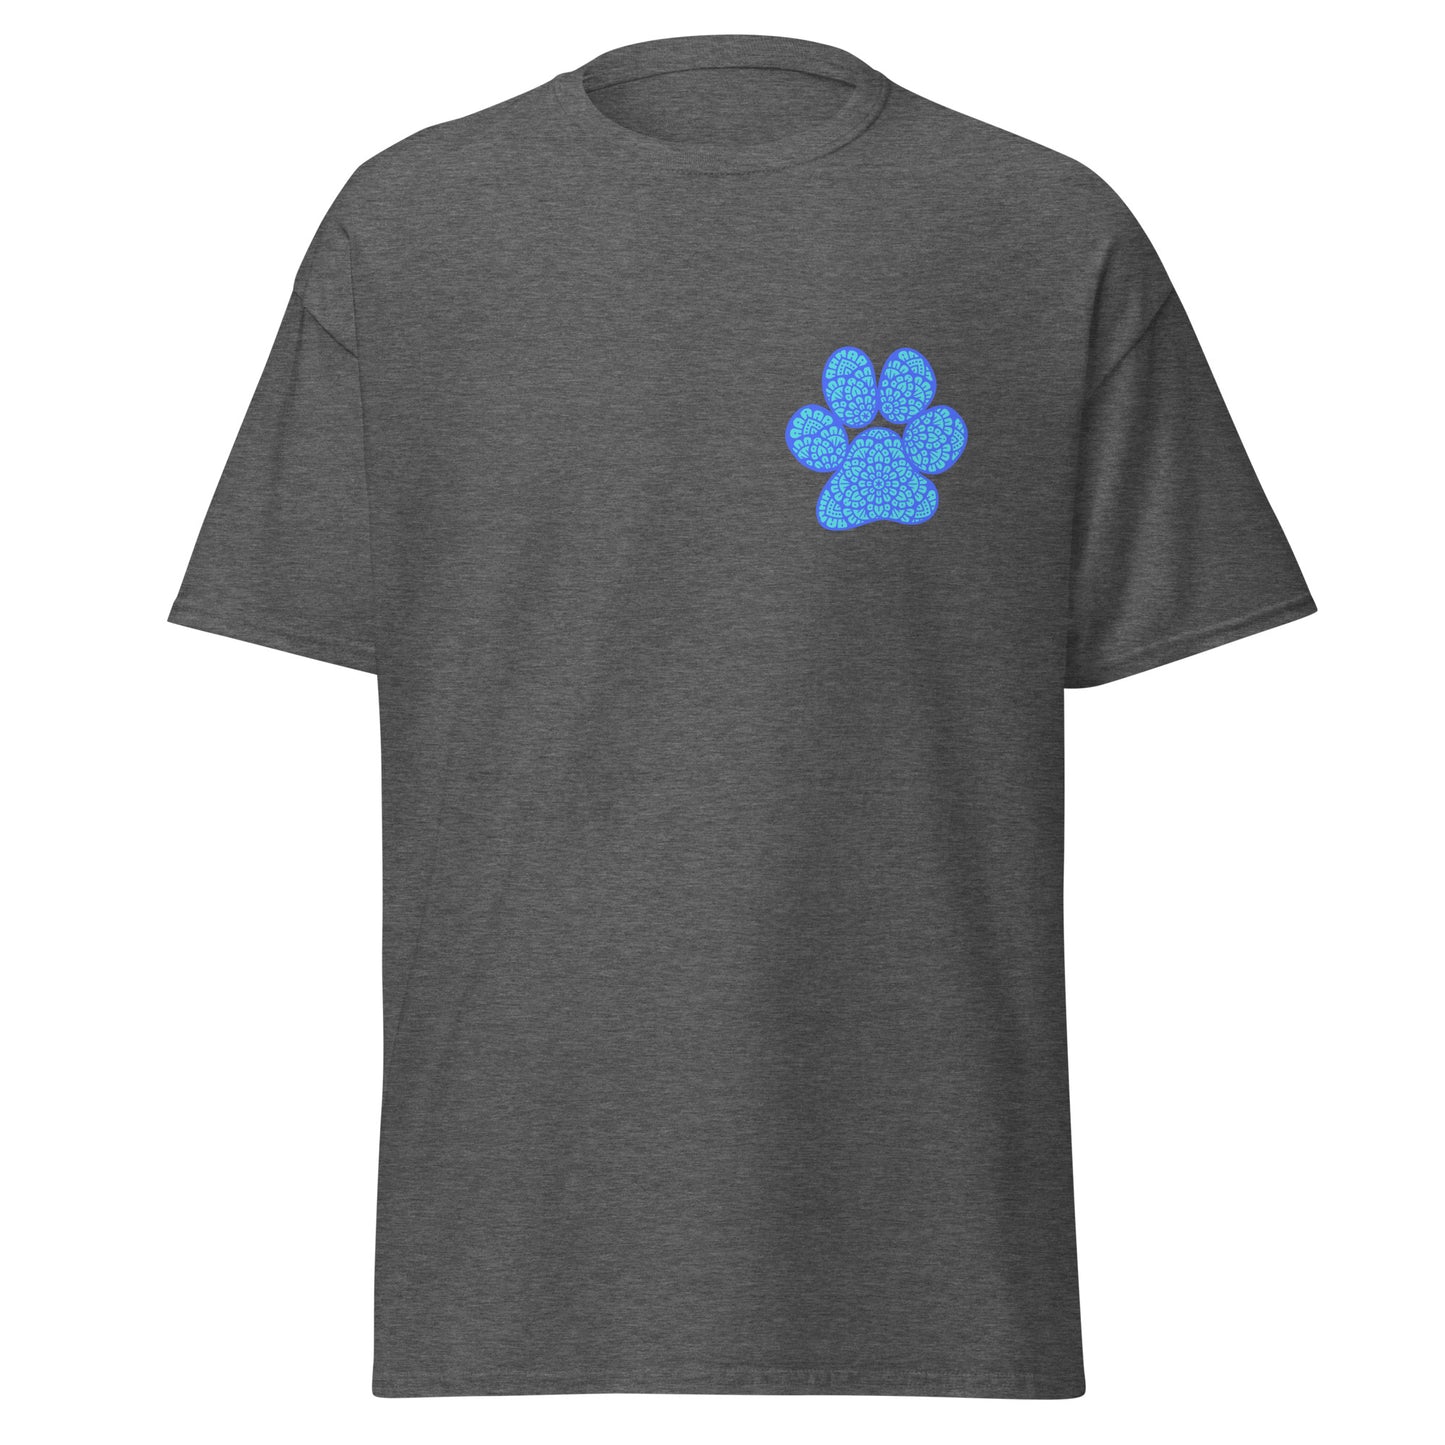 The Foster Dog Tee